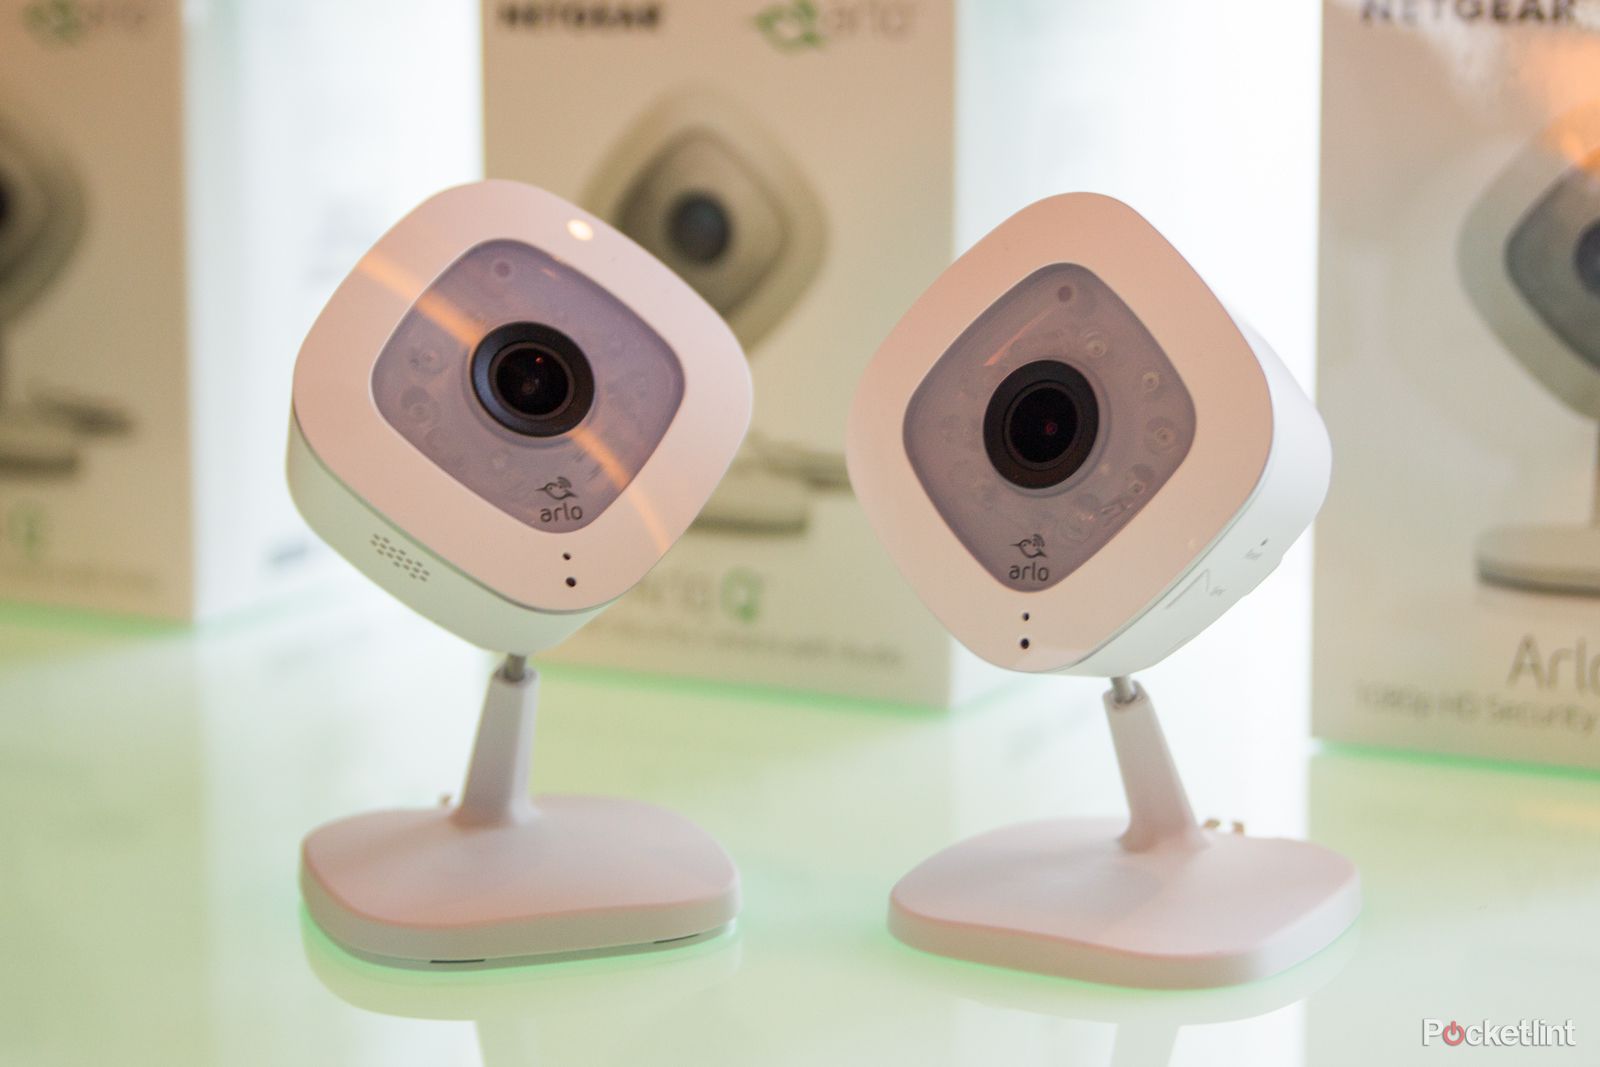 netgear arlo q is a 1080p smart security camera for your home image 1